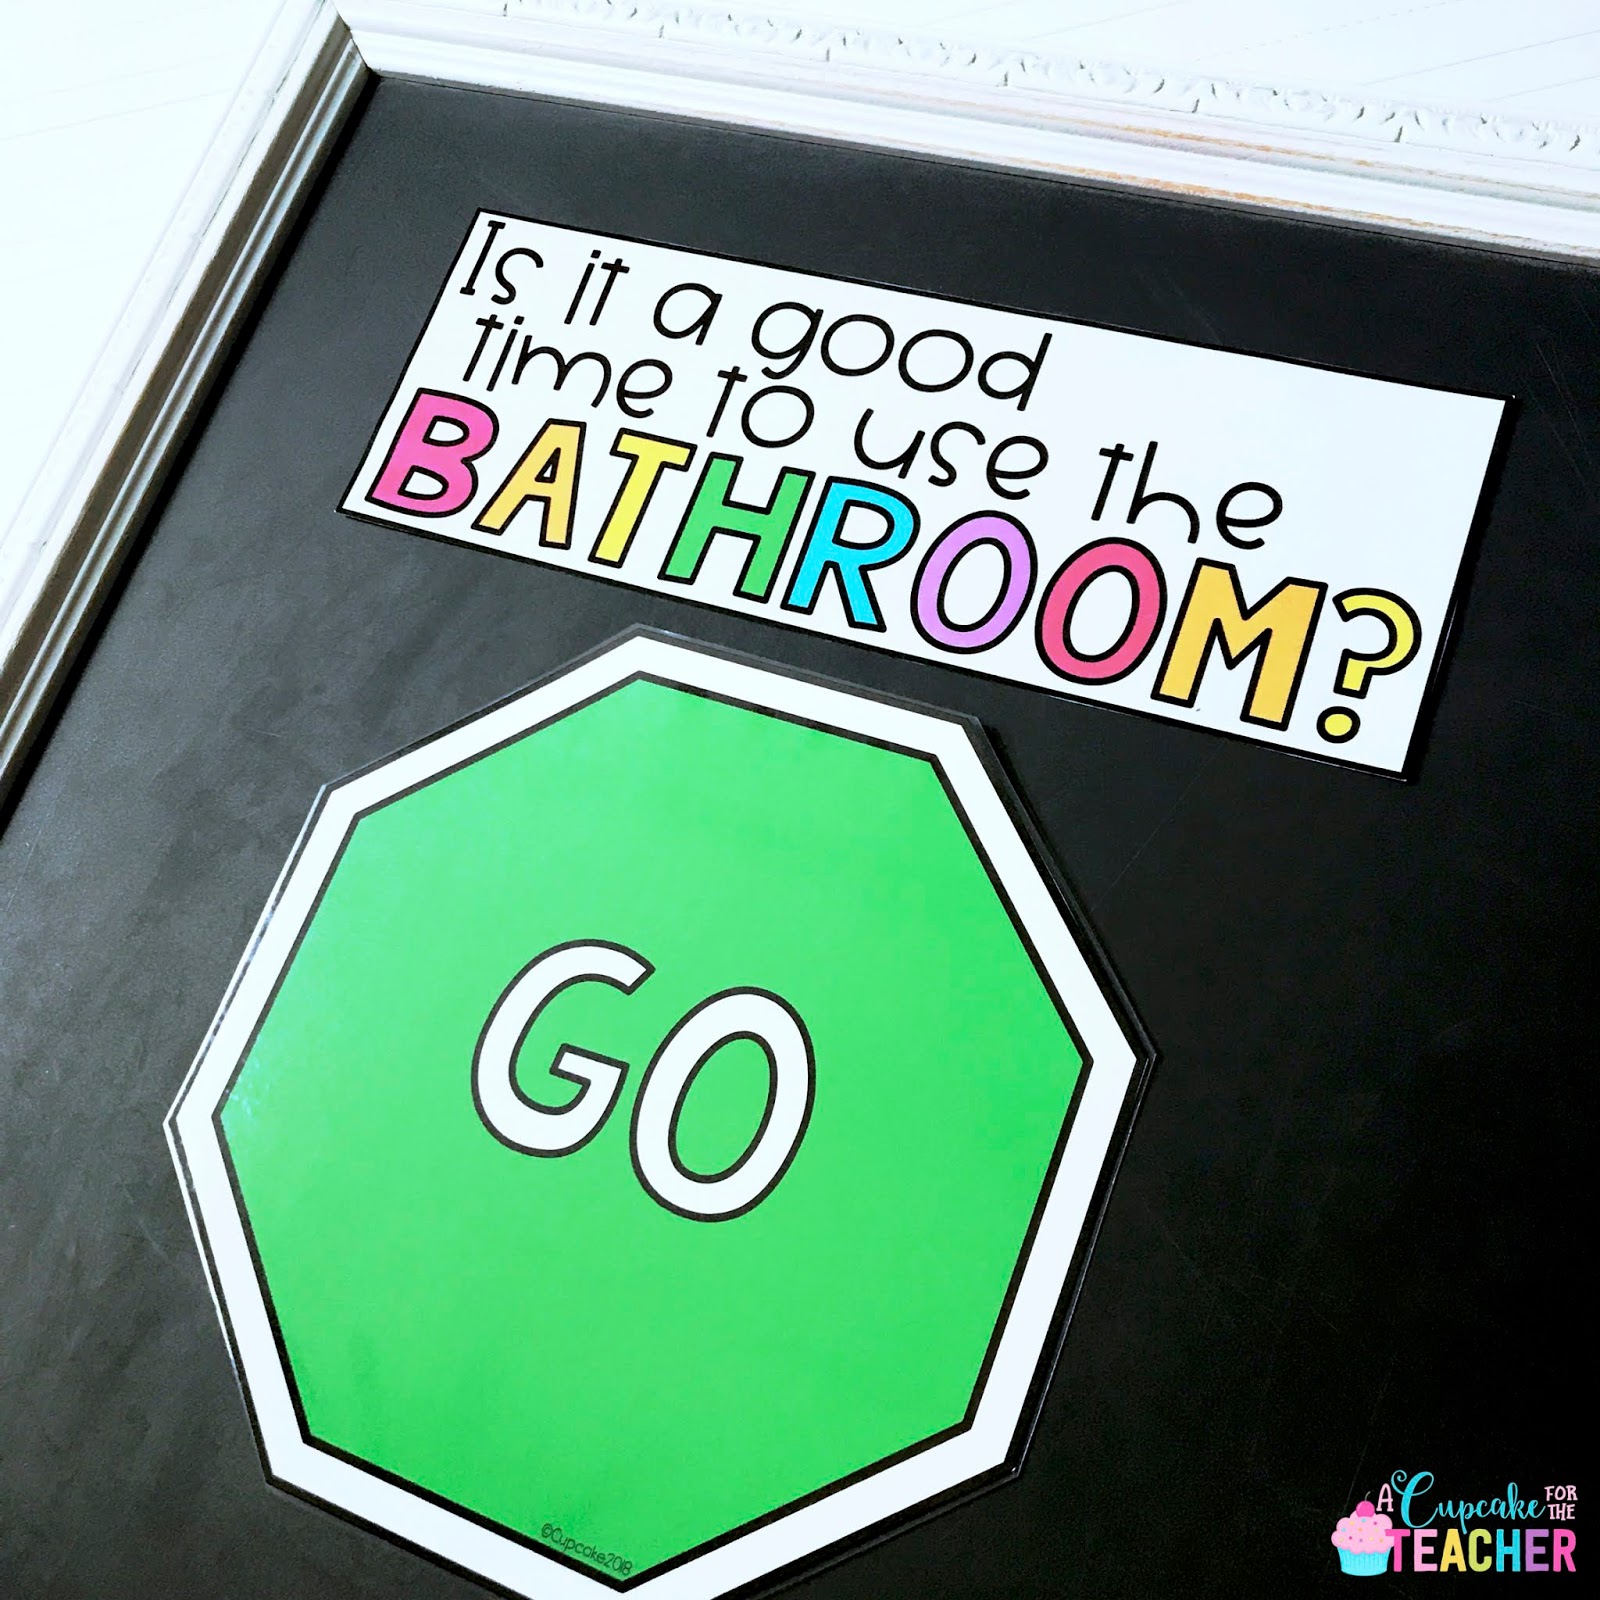 Use these "Stop" & "Go" bathroom signs from my Bathroom Rules & Management Kit as part of your bathroom management strategy in your elementary classroom